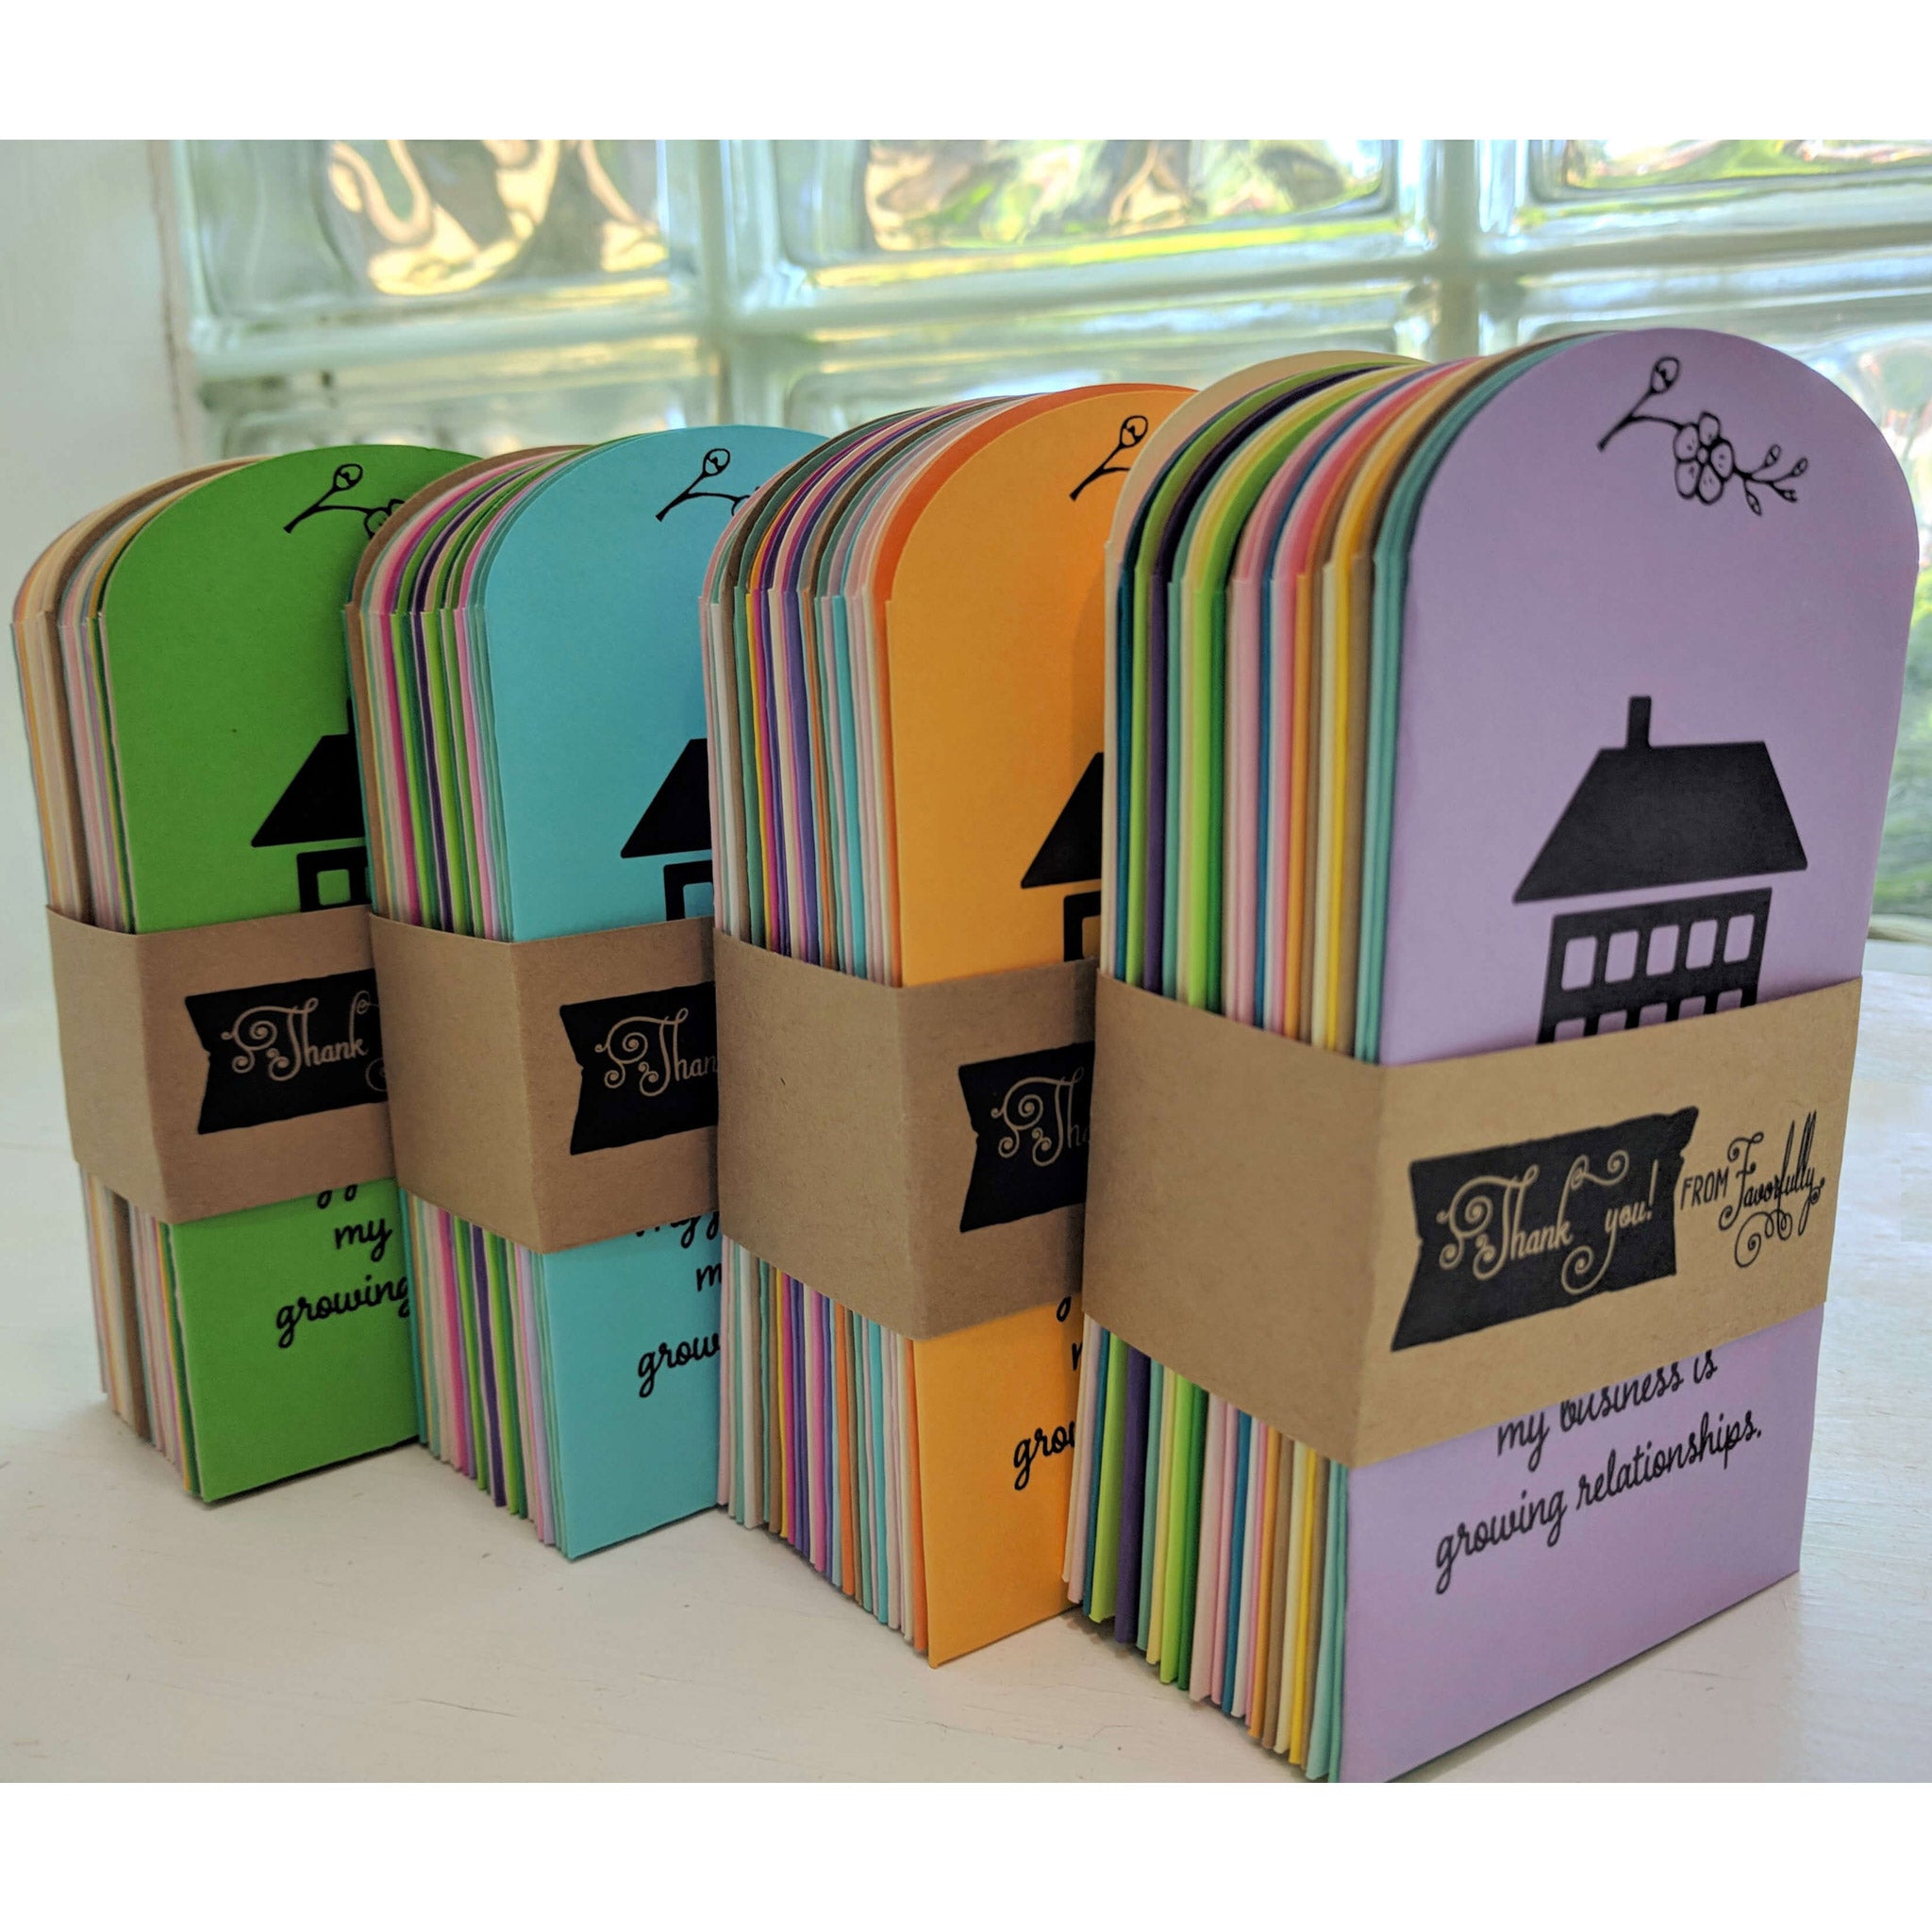 Envelope Style Lottery Ticket Holder - Brilliant Promos - Be Brilliant!